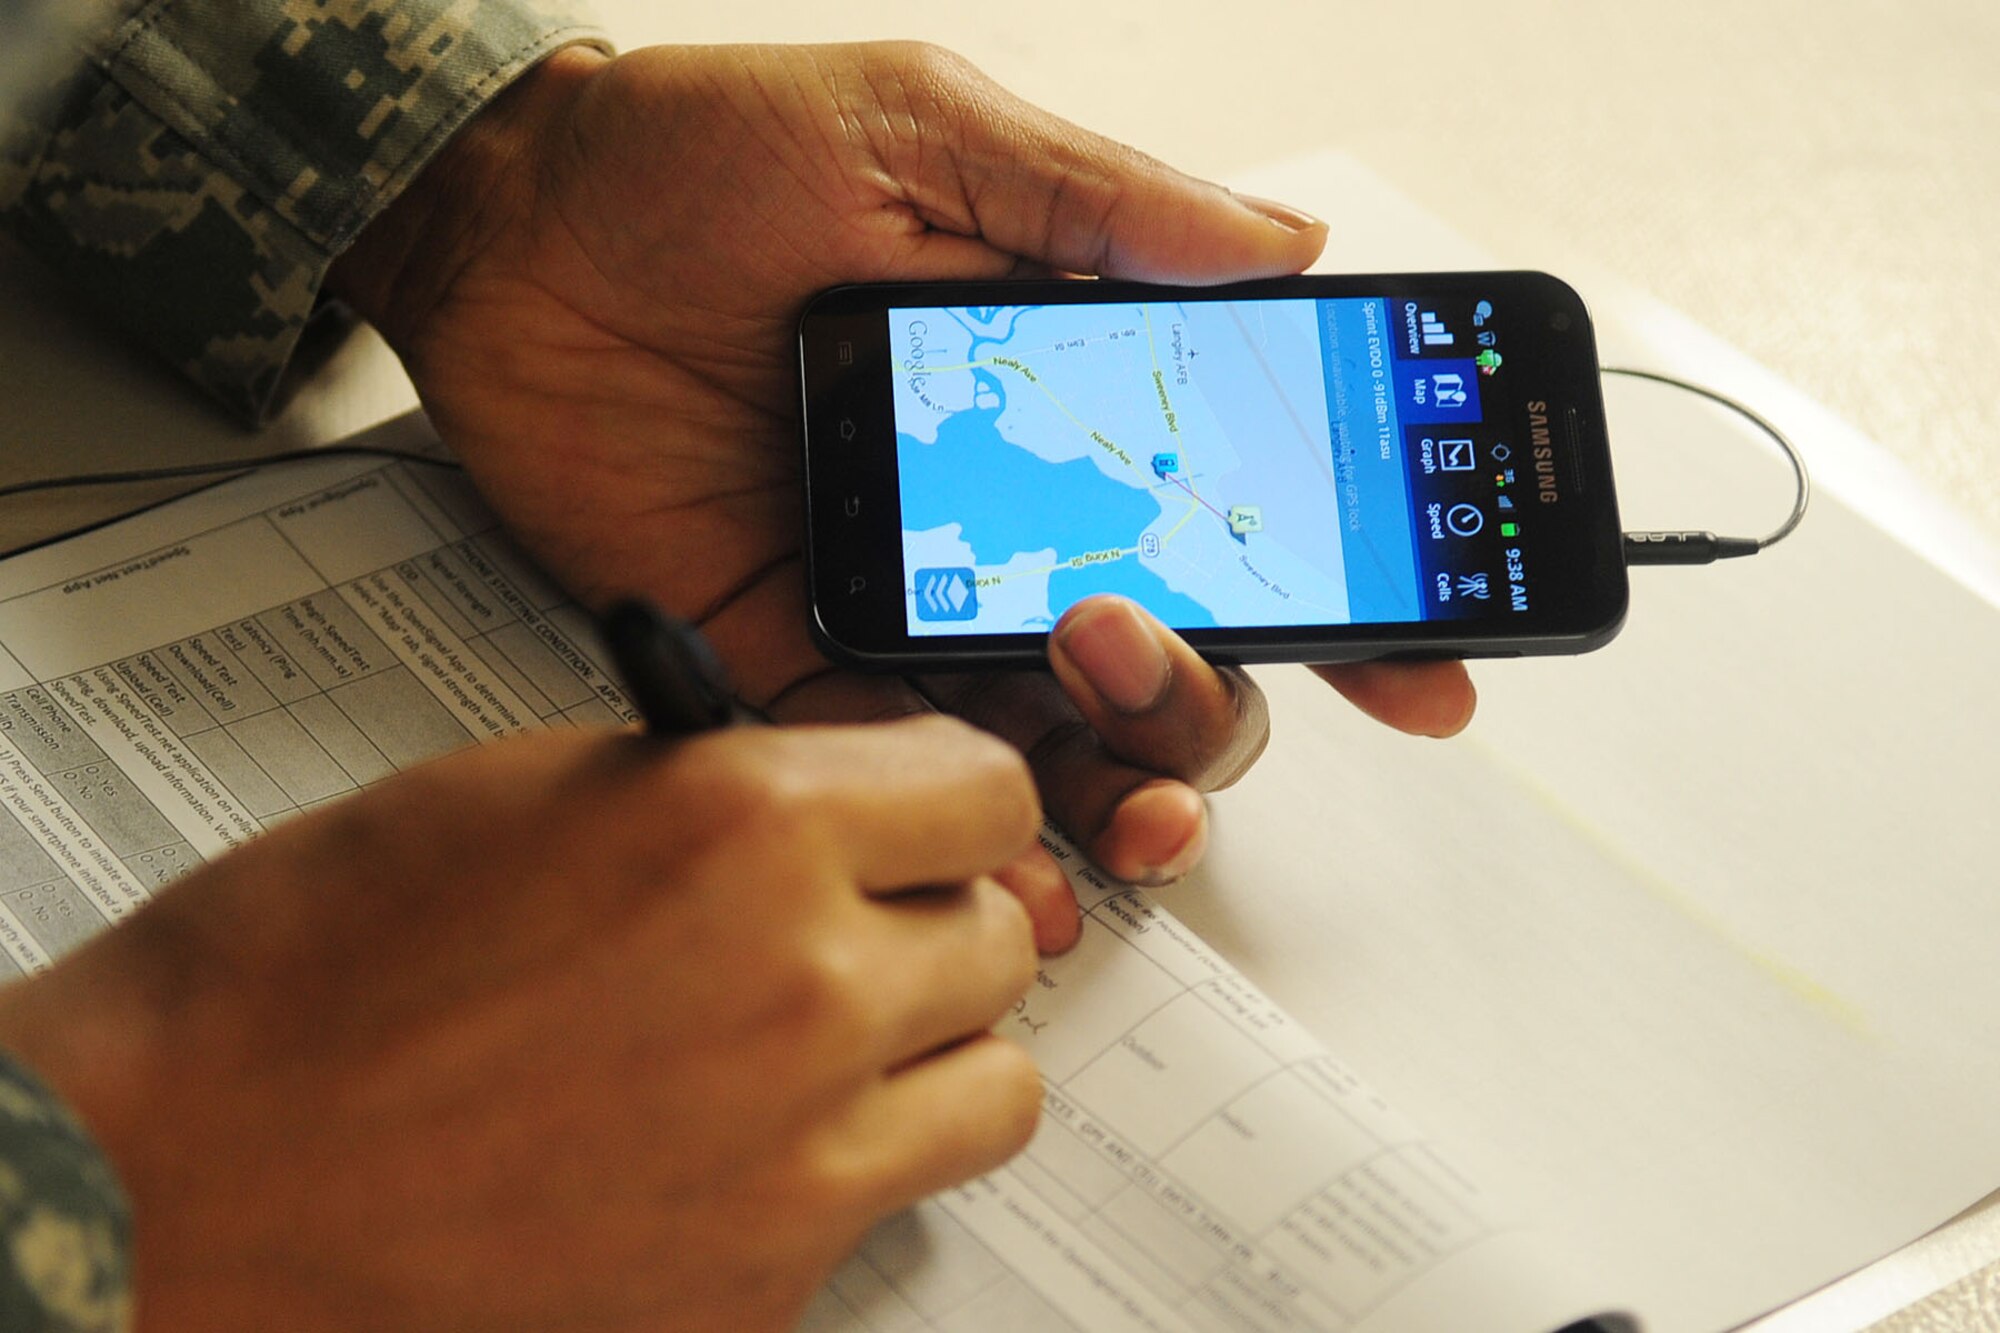 U.S. Staff Sgt. Oris Key, 633rd Security Forces Squadron patrolman, reads a checklist during a Joint Expeditionary Force Experiment exercise at Langley Air Force Base, Va., Jan. 25, 2012. The Air Force will use the information from the exercise to unify communication capabilities, and reduce the number of radio and wired local area networks. (U.S. Air Force photo by Staff Sgt. Ashley Hawkins/Released)